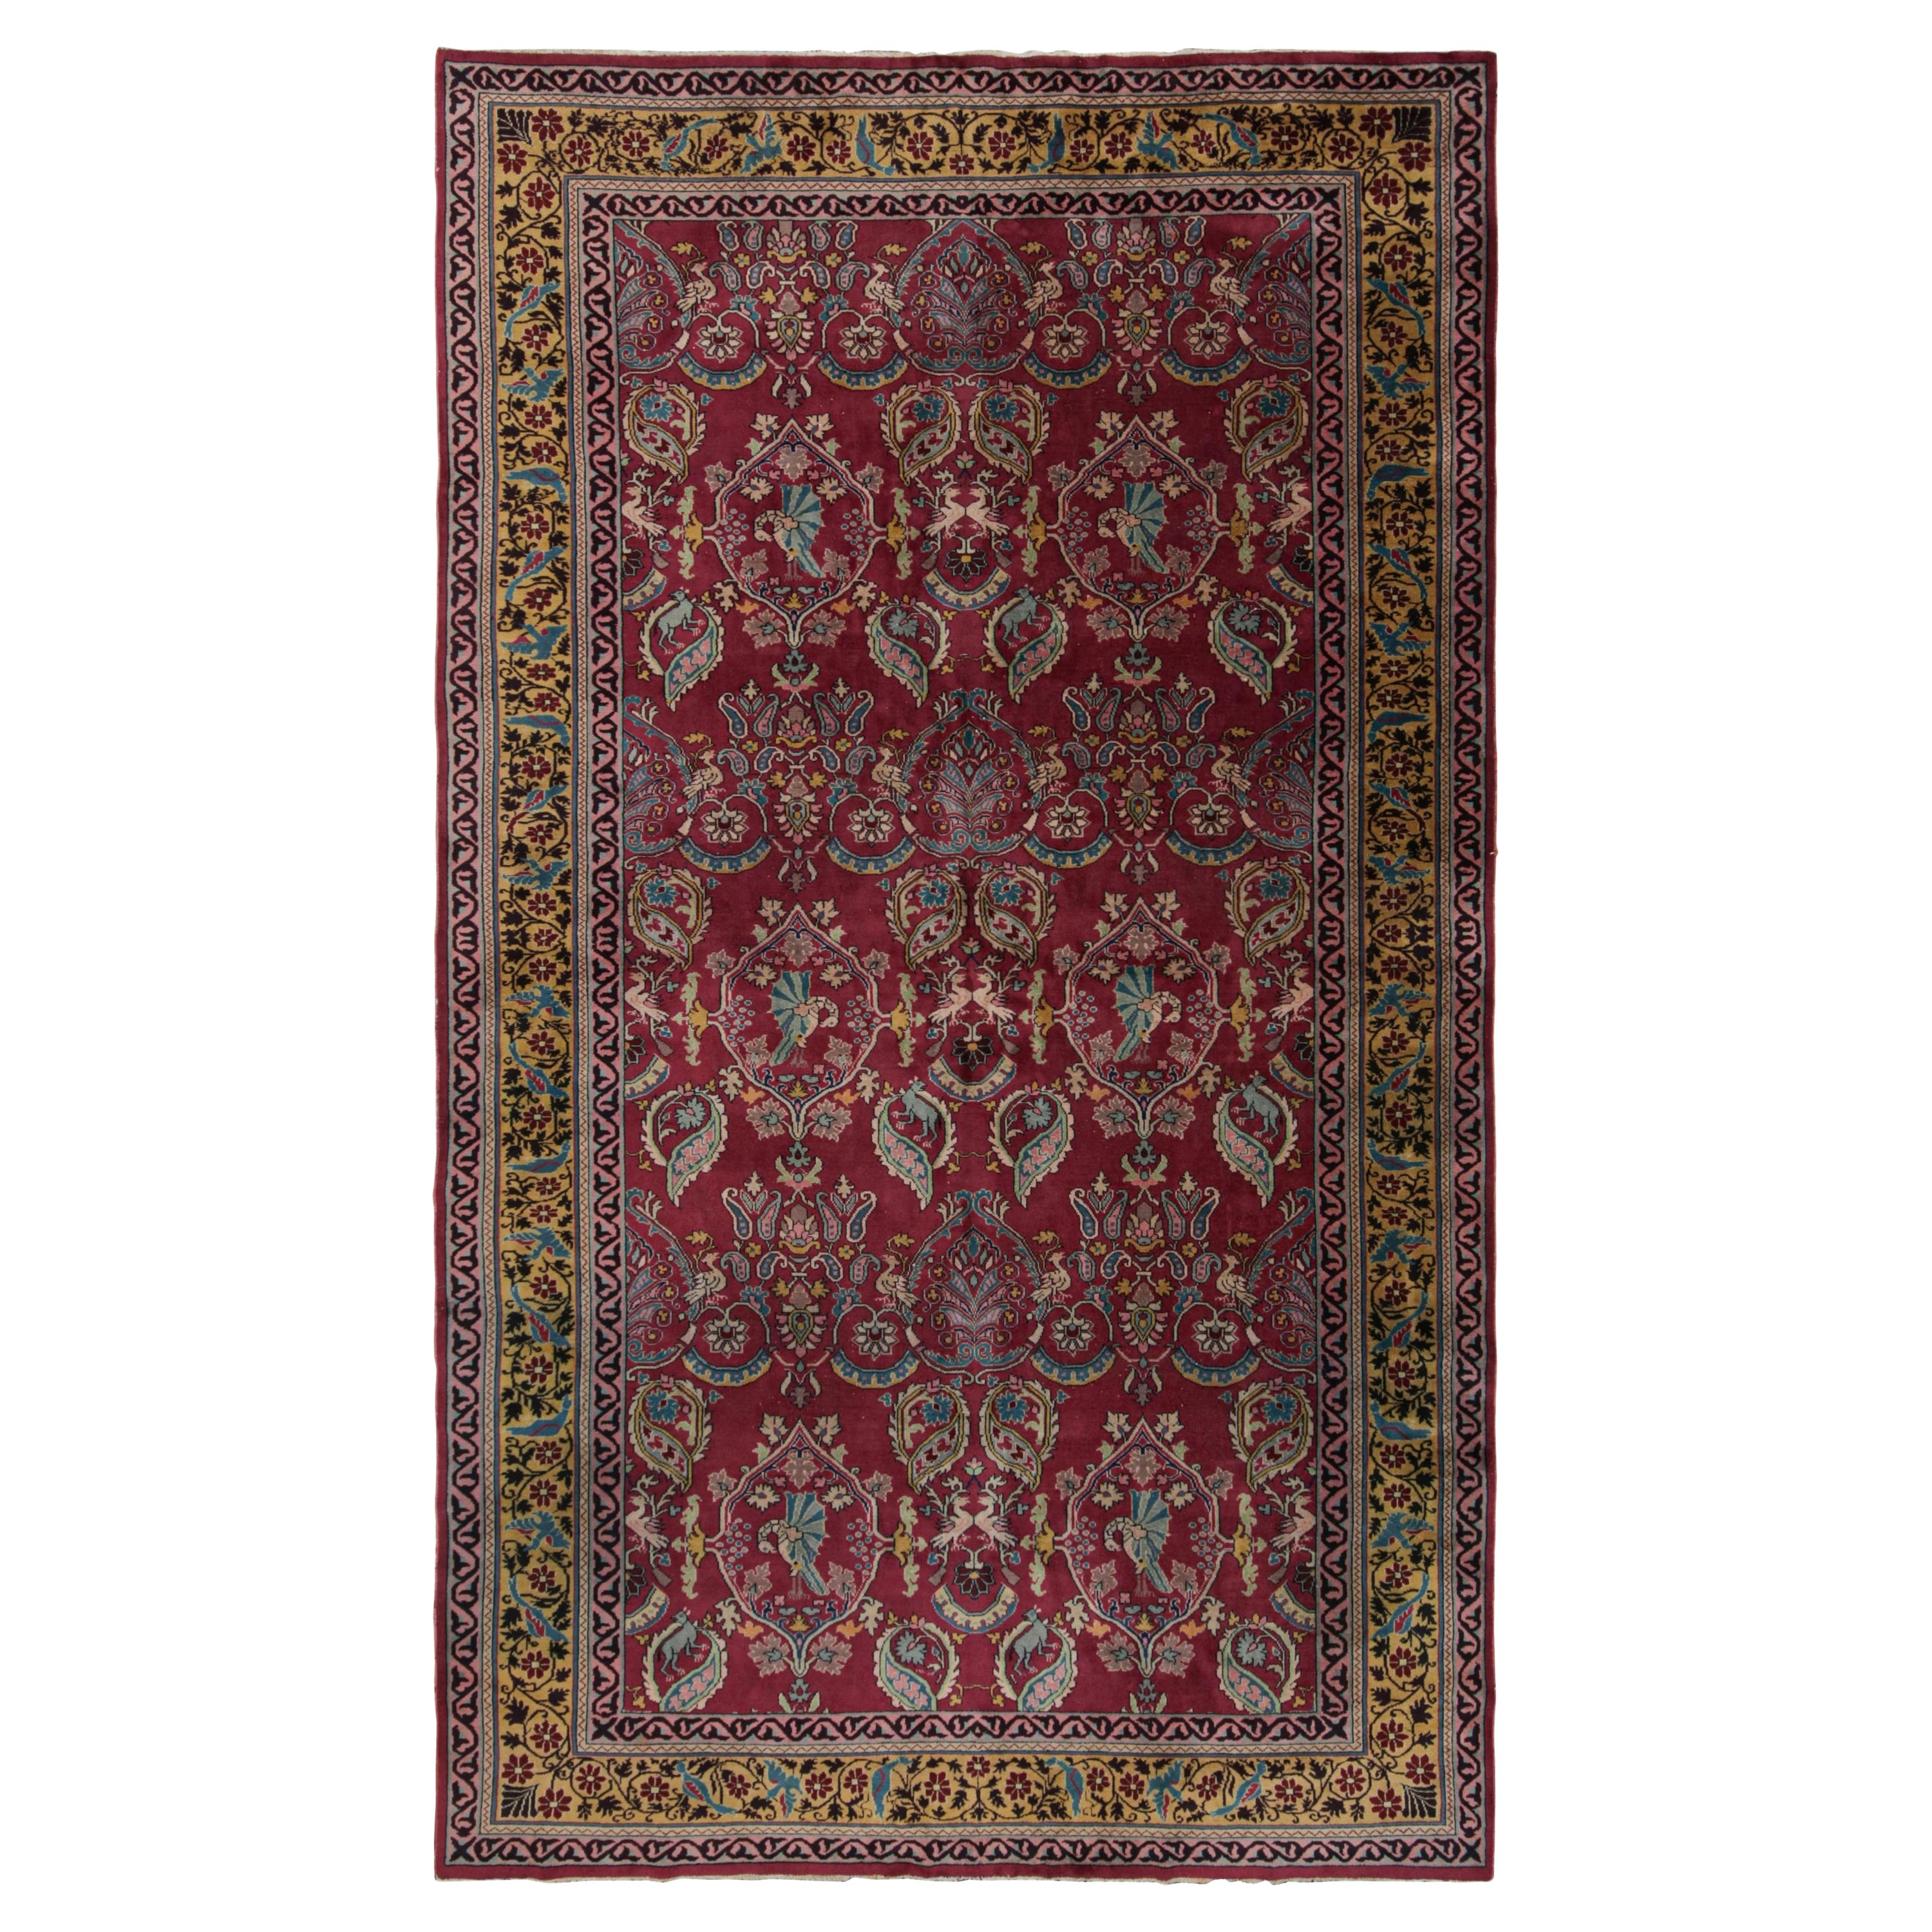 Antique Indian Rug in Burgundy and Gold with Floral Patterns For Sale